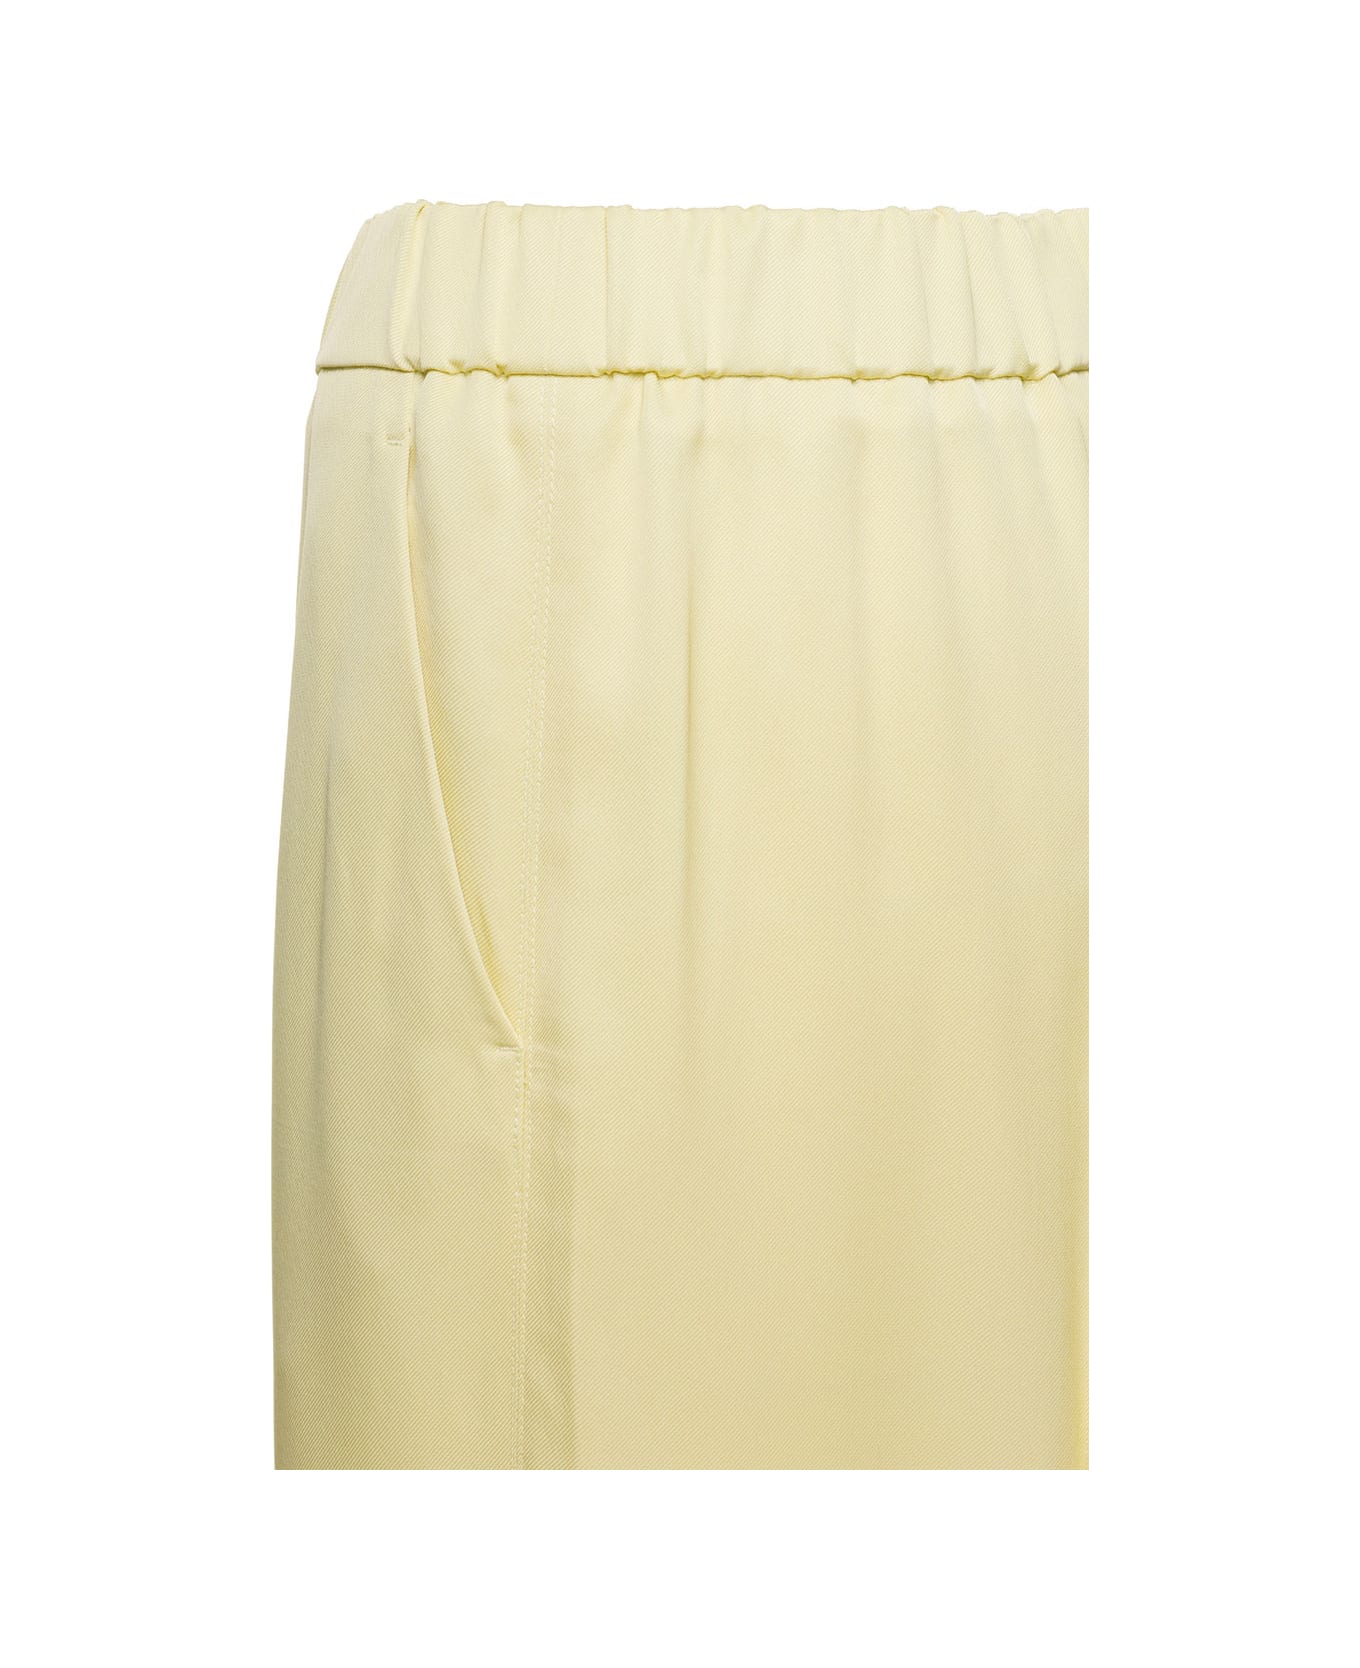 Jil Sander Yellow High Wasited Trousers In Viscose Woman - Yellow ボトムス